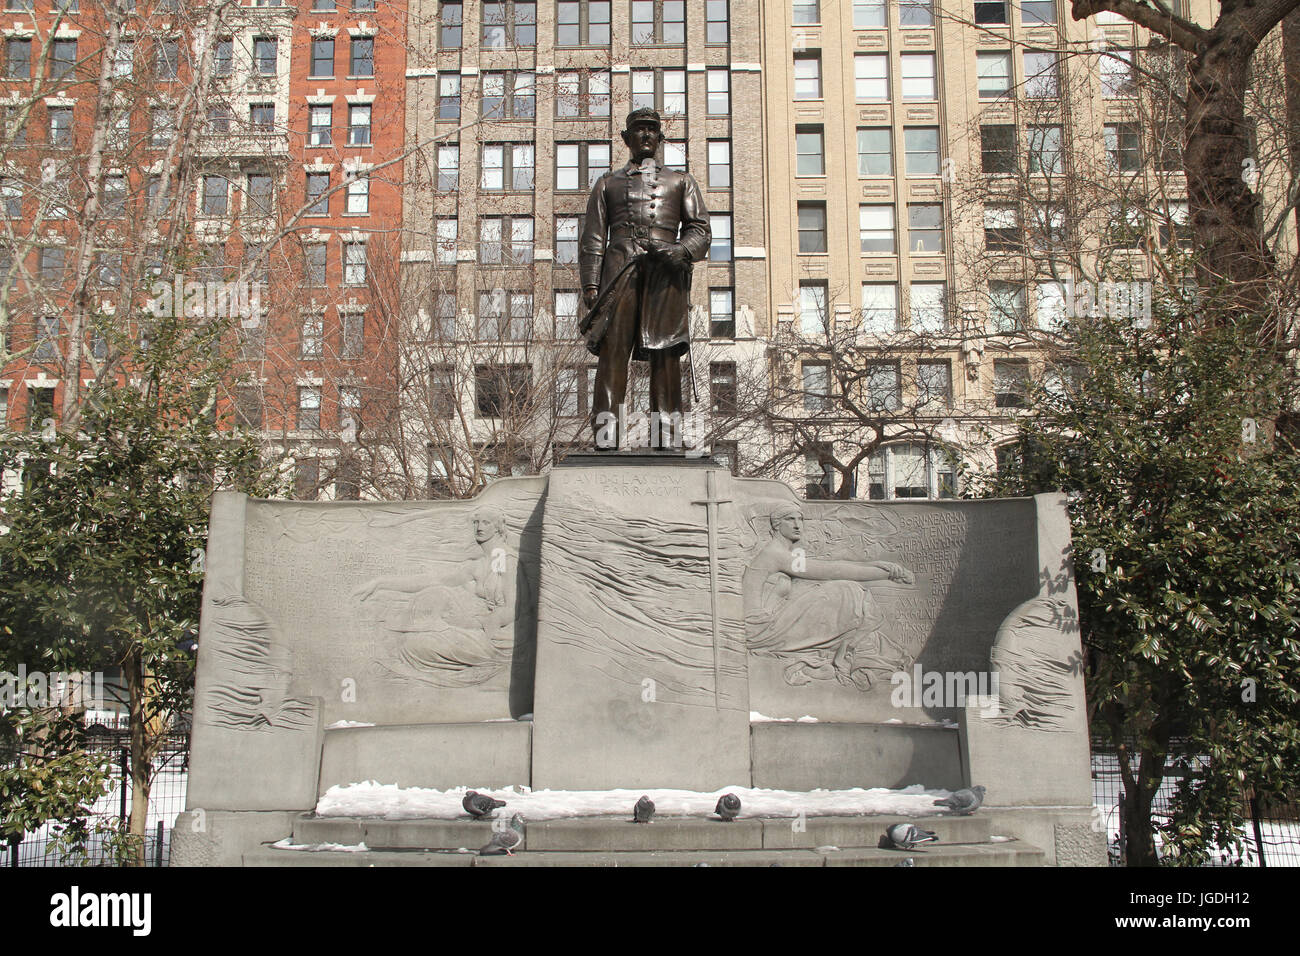 David Glasgow Farragut statue, Standing figure (over life-size) with integral plinth, on pedestal with extended exedra wings; pedestal has bas-relief of sword in ocean waves; each wing has a life-size bas-relief of seated female figure, Madison Square Park, Fifth Avenue at 23rd st, New York, United States Stock Photo